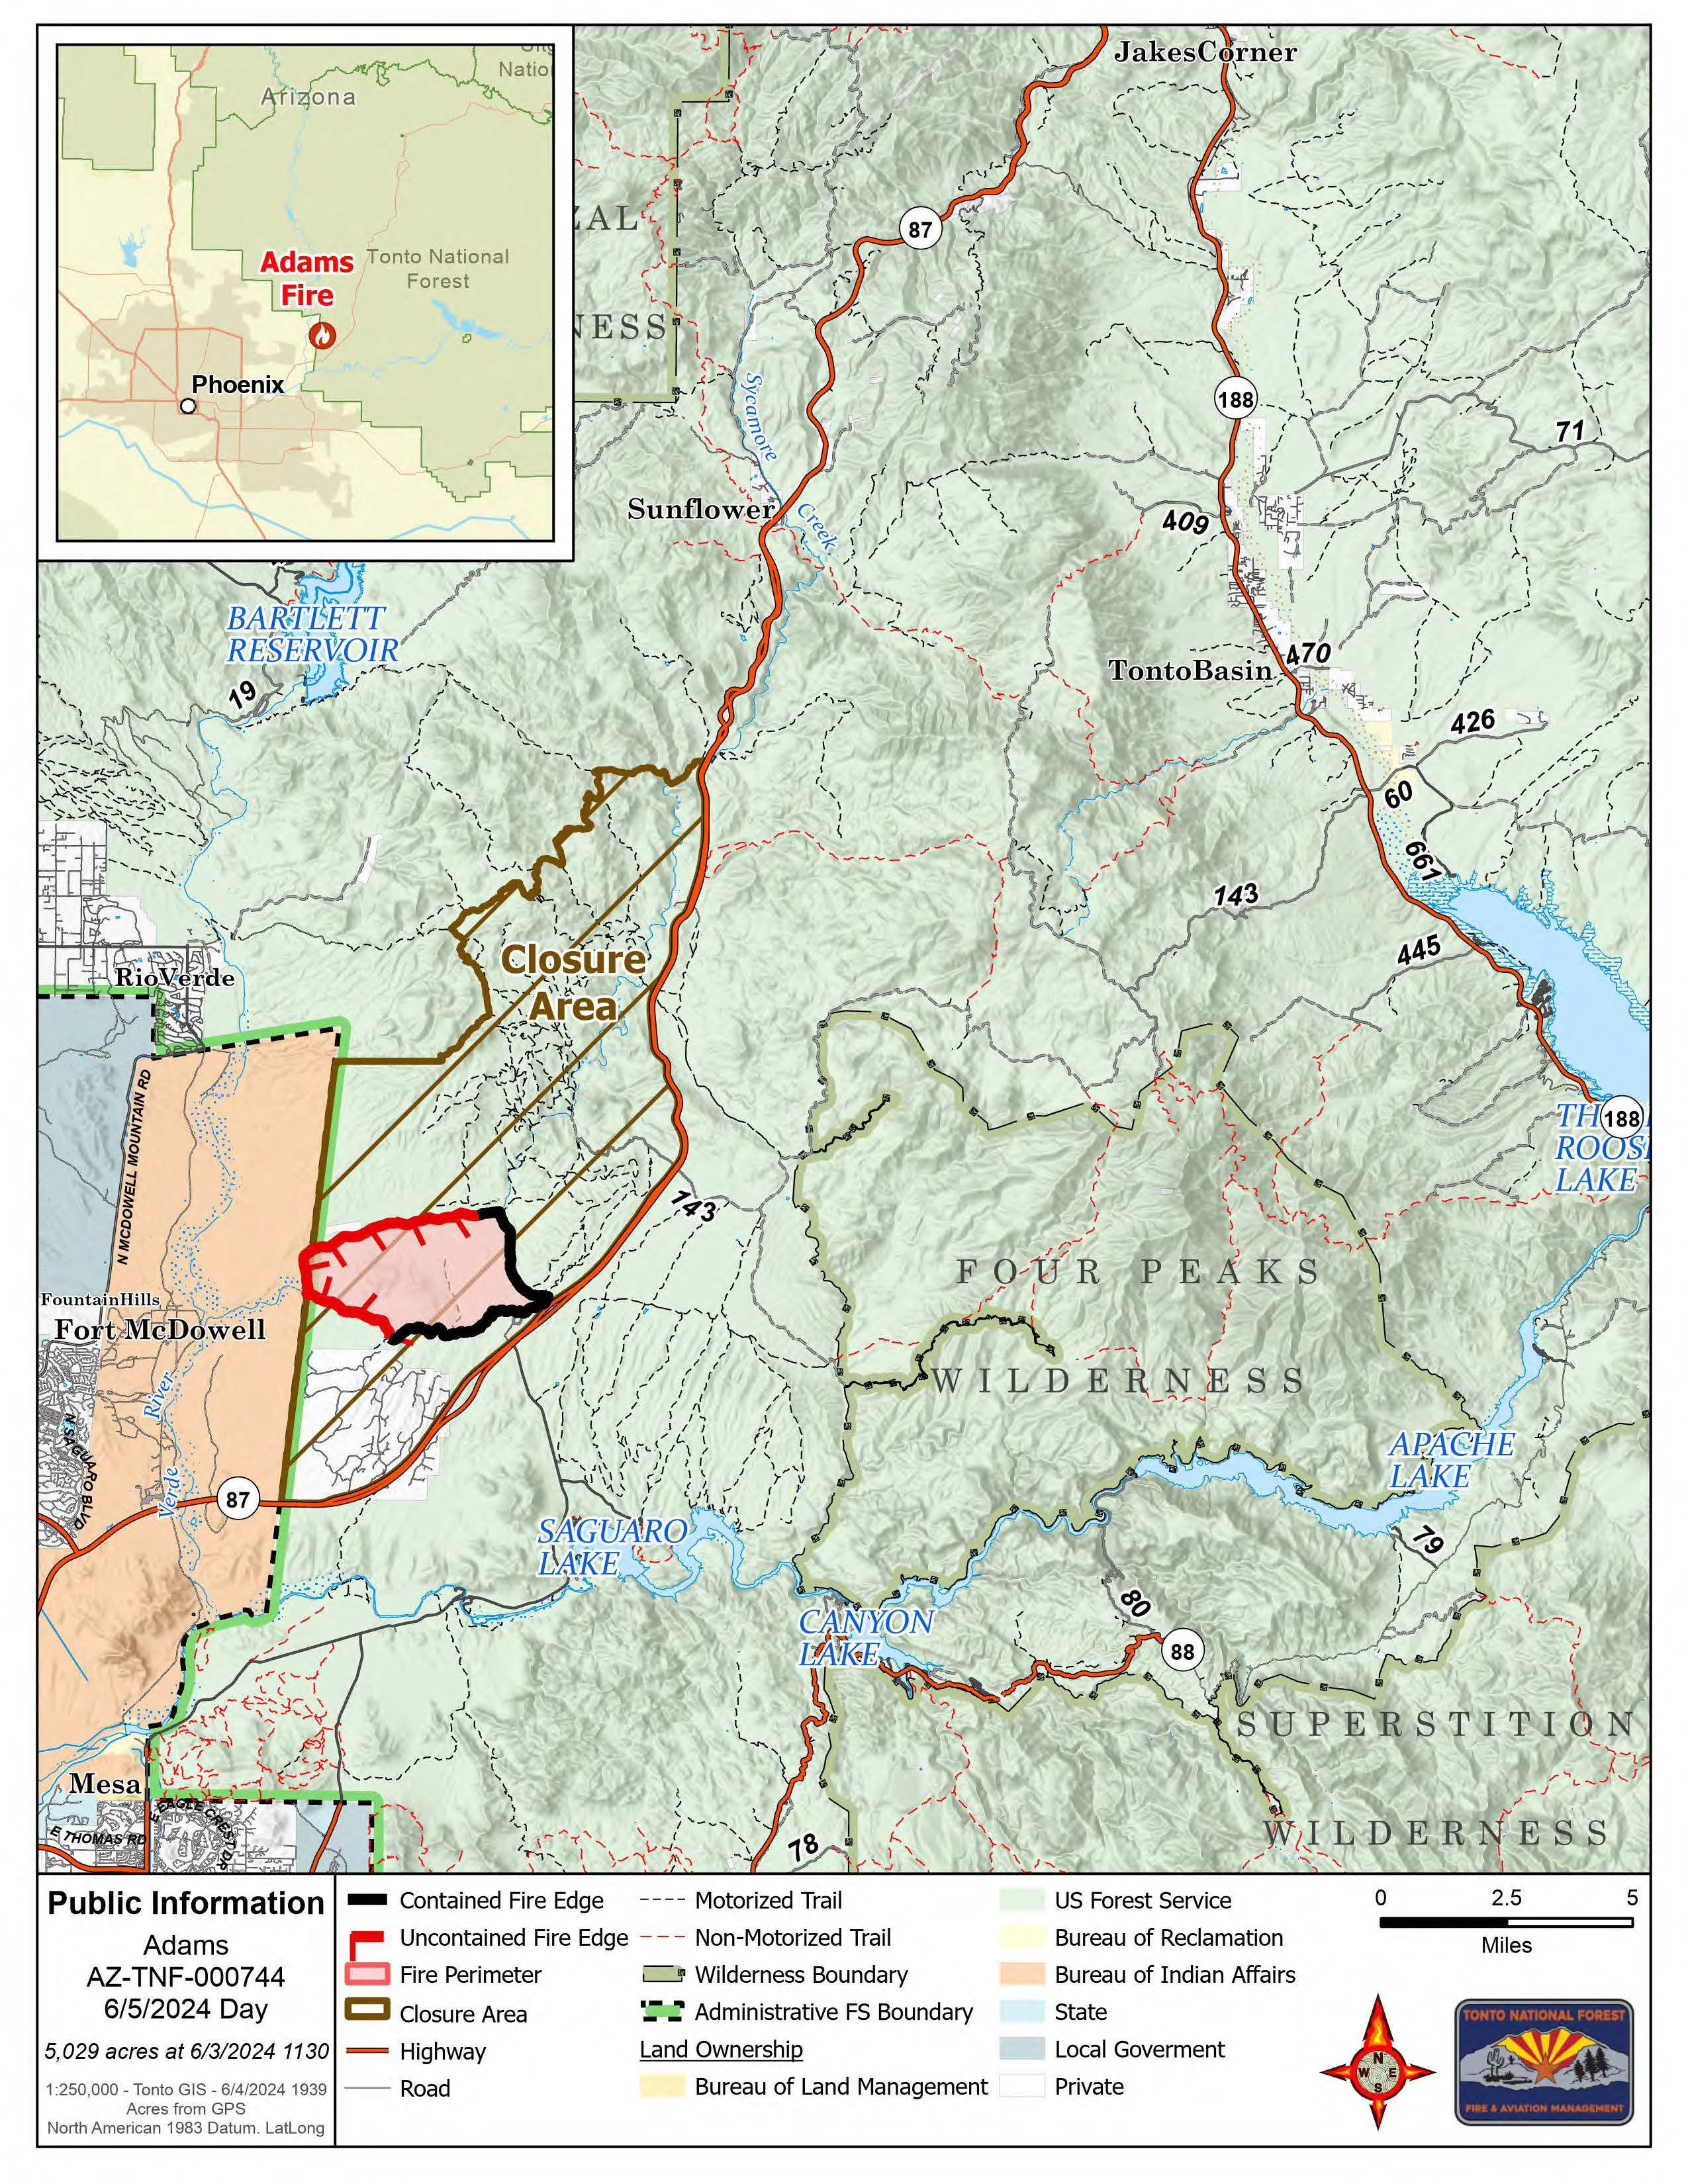 This is a map of the Adams Fire on June 5 2024